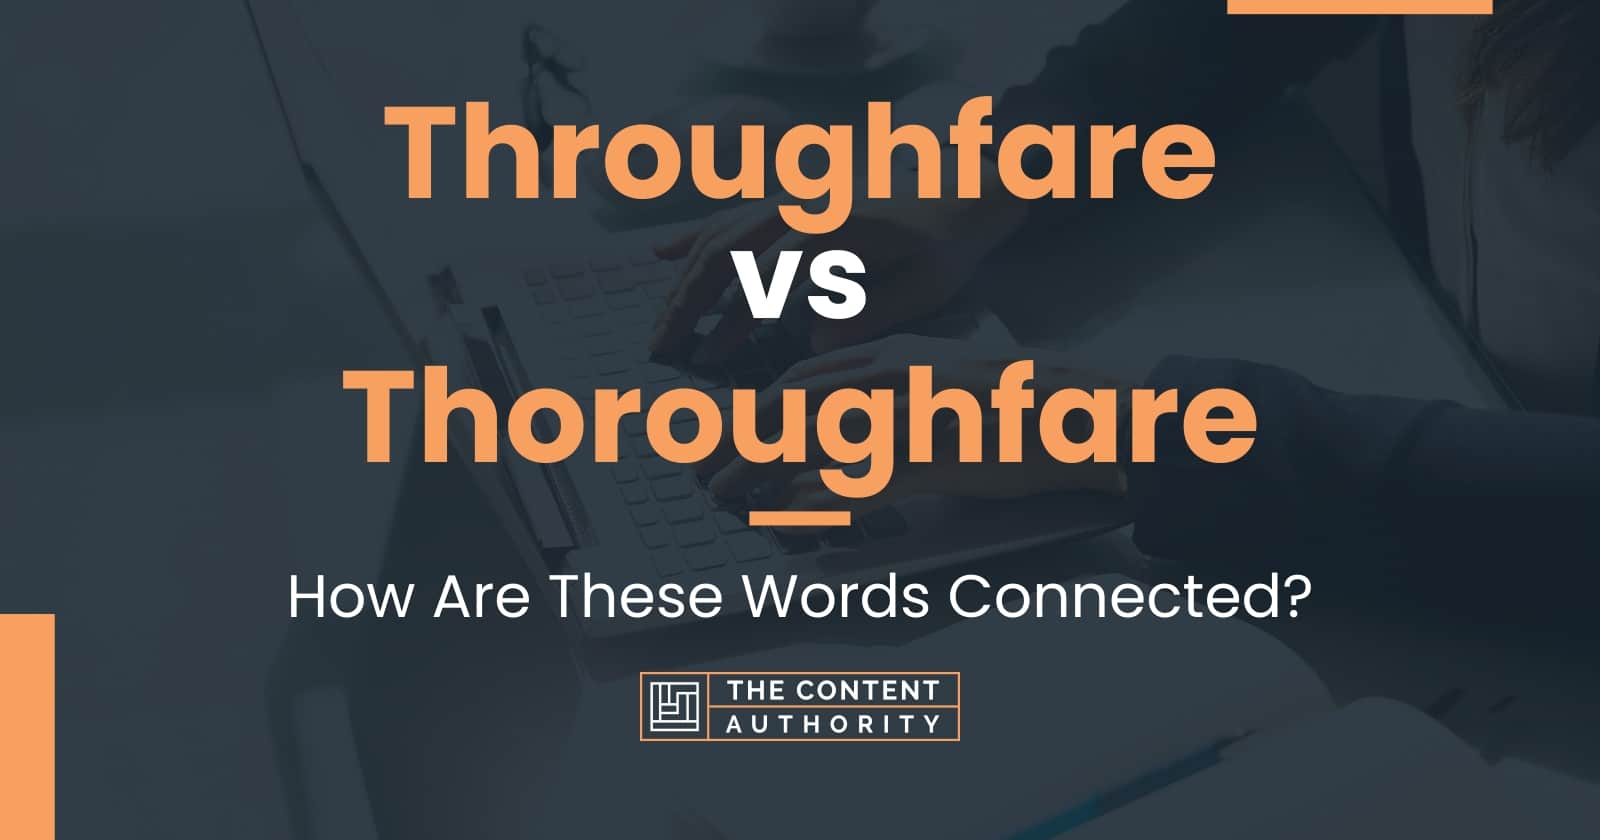 Throughfare vs Thoroughfare: How Are These Words Connected?